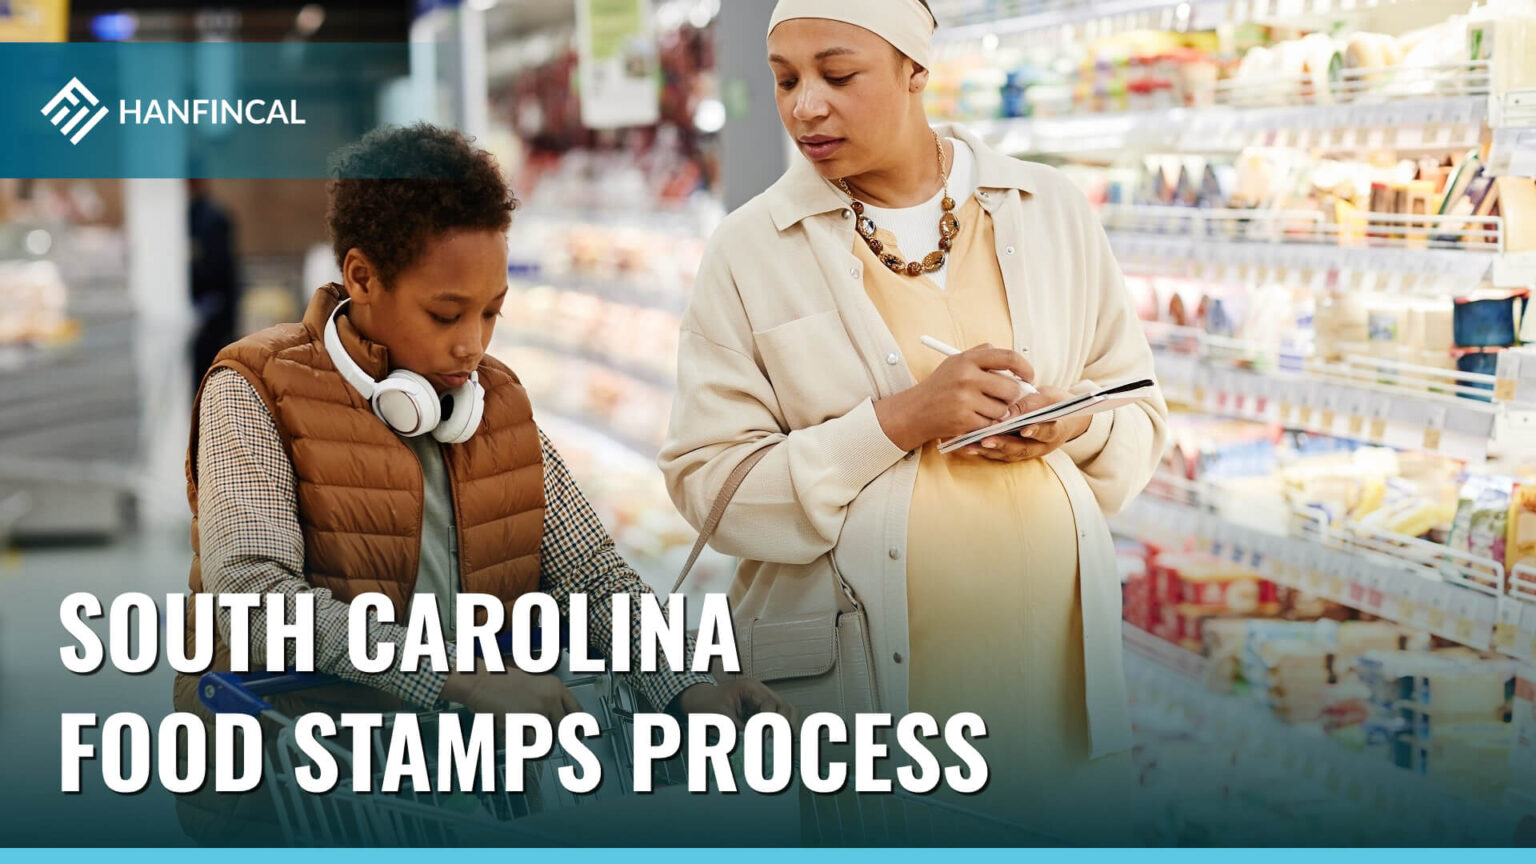 How to apply for Food Stamps in South Carolina (02/2023)? Hanfincal